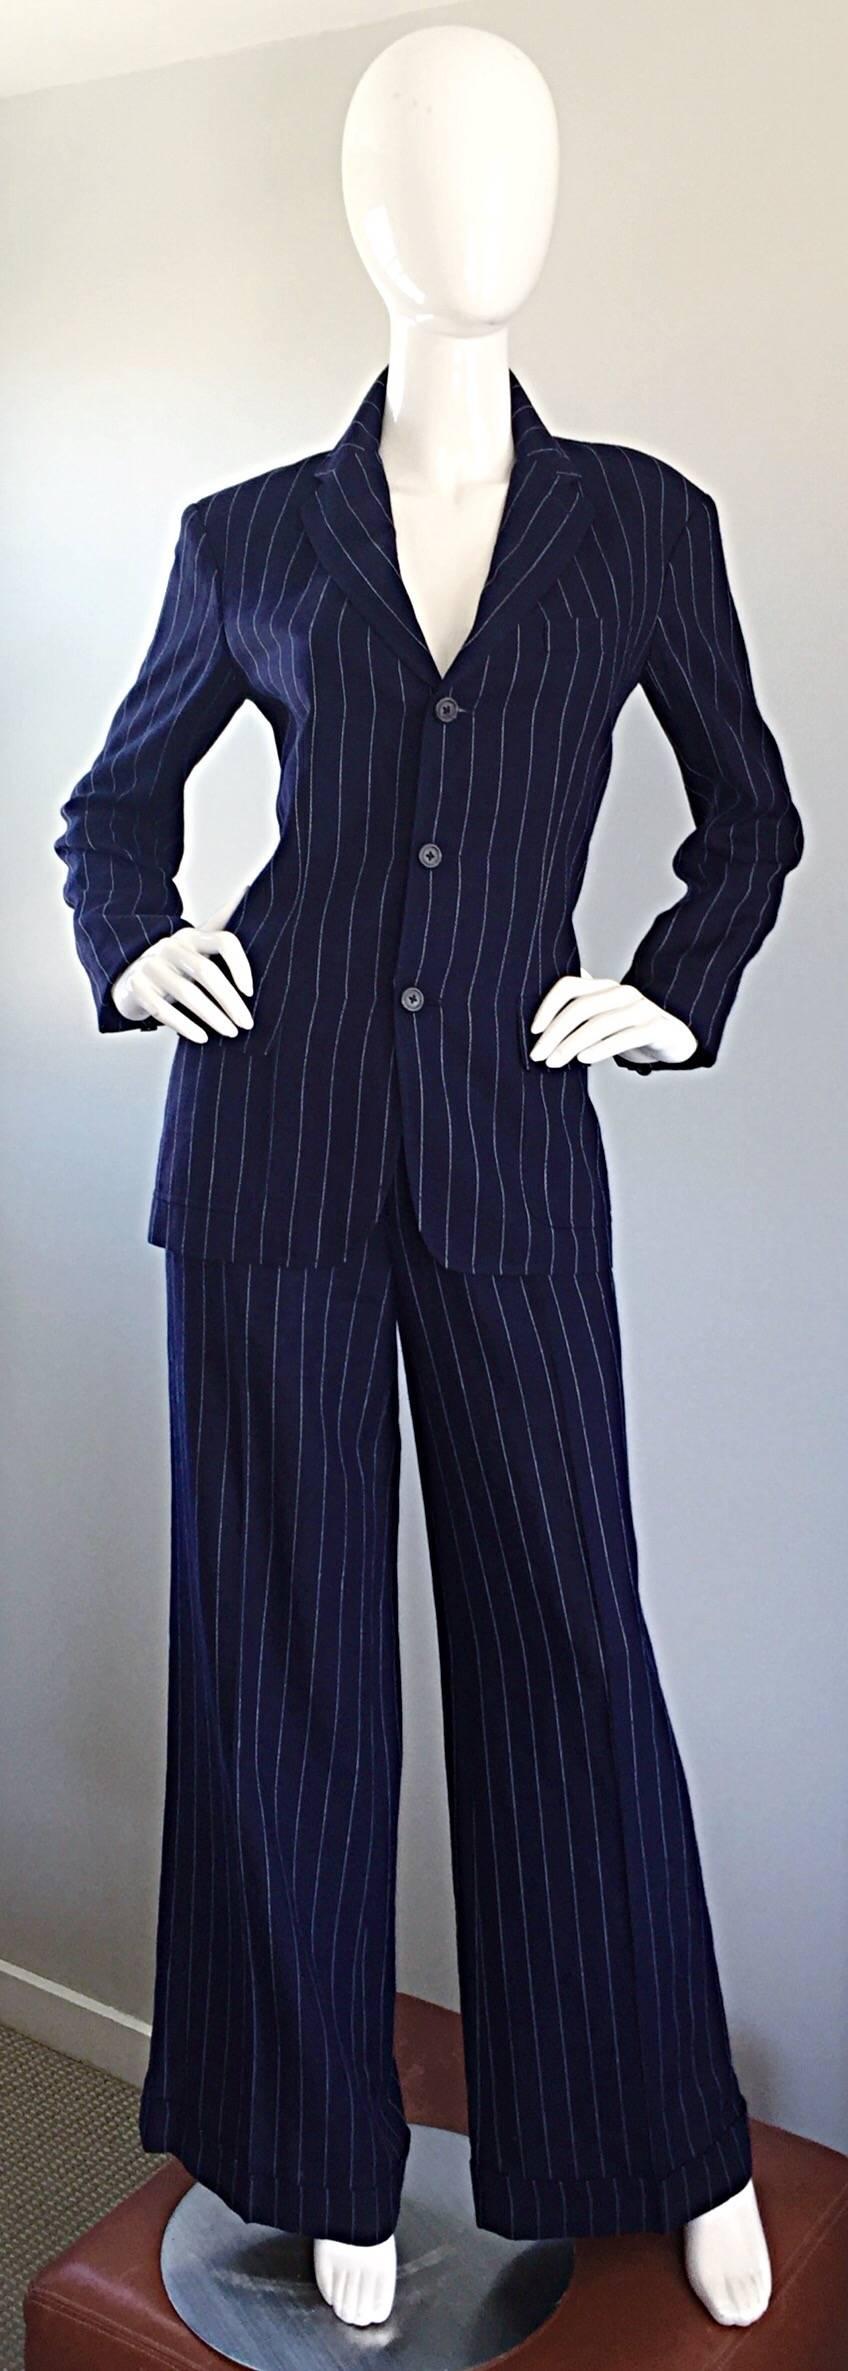 Amazing and chic vintage RALPH LAUREN (Blue Label) Italian navy blue and white pinstripe le smoking suit! Insanely stylish, with wide flared legs with a cuffed hem. Flattering midrise fit, with pockets on both sides of the waist and rear (pockets